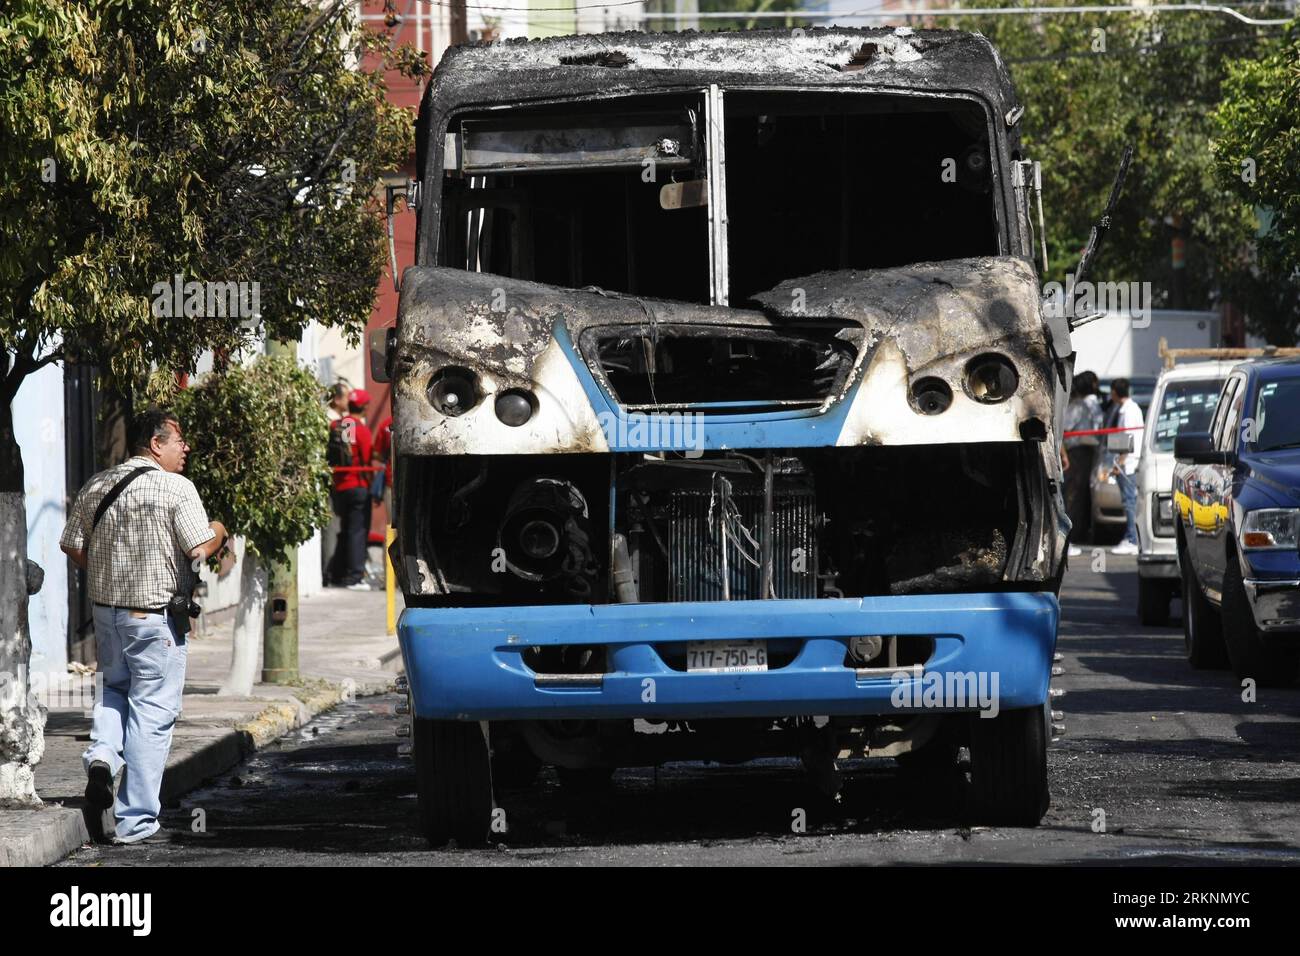 Bildnummer: 57330451  Datum: 09.03.2012  Copyright: imago/Xinhua (120310) -- GUADALAJARA, March 10, 2012 (Xinhua) -- A journalist stands in front of a burning bus used as a roadblock during a series of clashes between authorities and the organized crime, in the city of Guadalajara, Mexico, March 9, 2012. Around 16 places of the metropolitan area of Guadalajara were affected with burned vehicles causing roadblocks. According to the local press, an operation was conducted by elements of the Mexican Army against the cartel of Jalisco Nueva Generacion (Jalisco s New Generation), one of whose leade Stock Photo